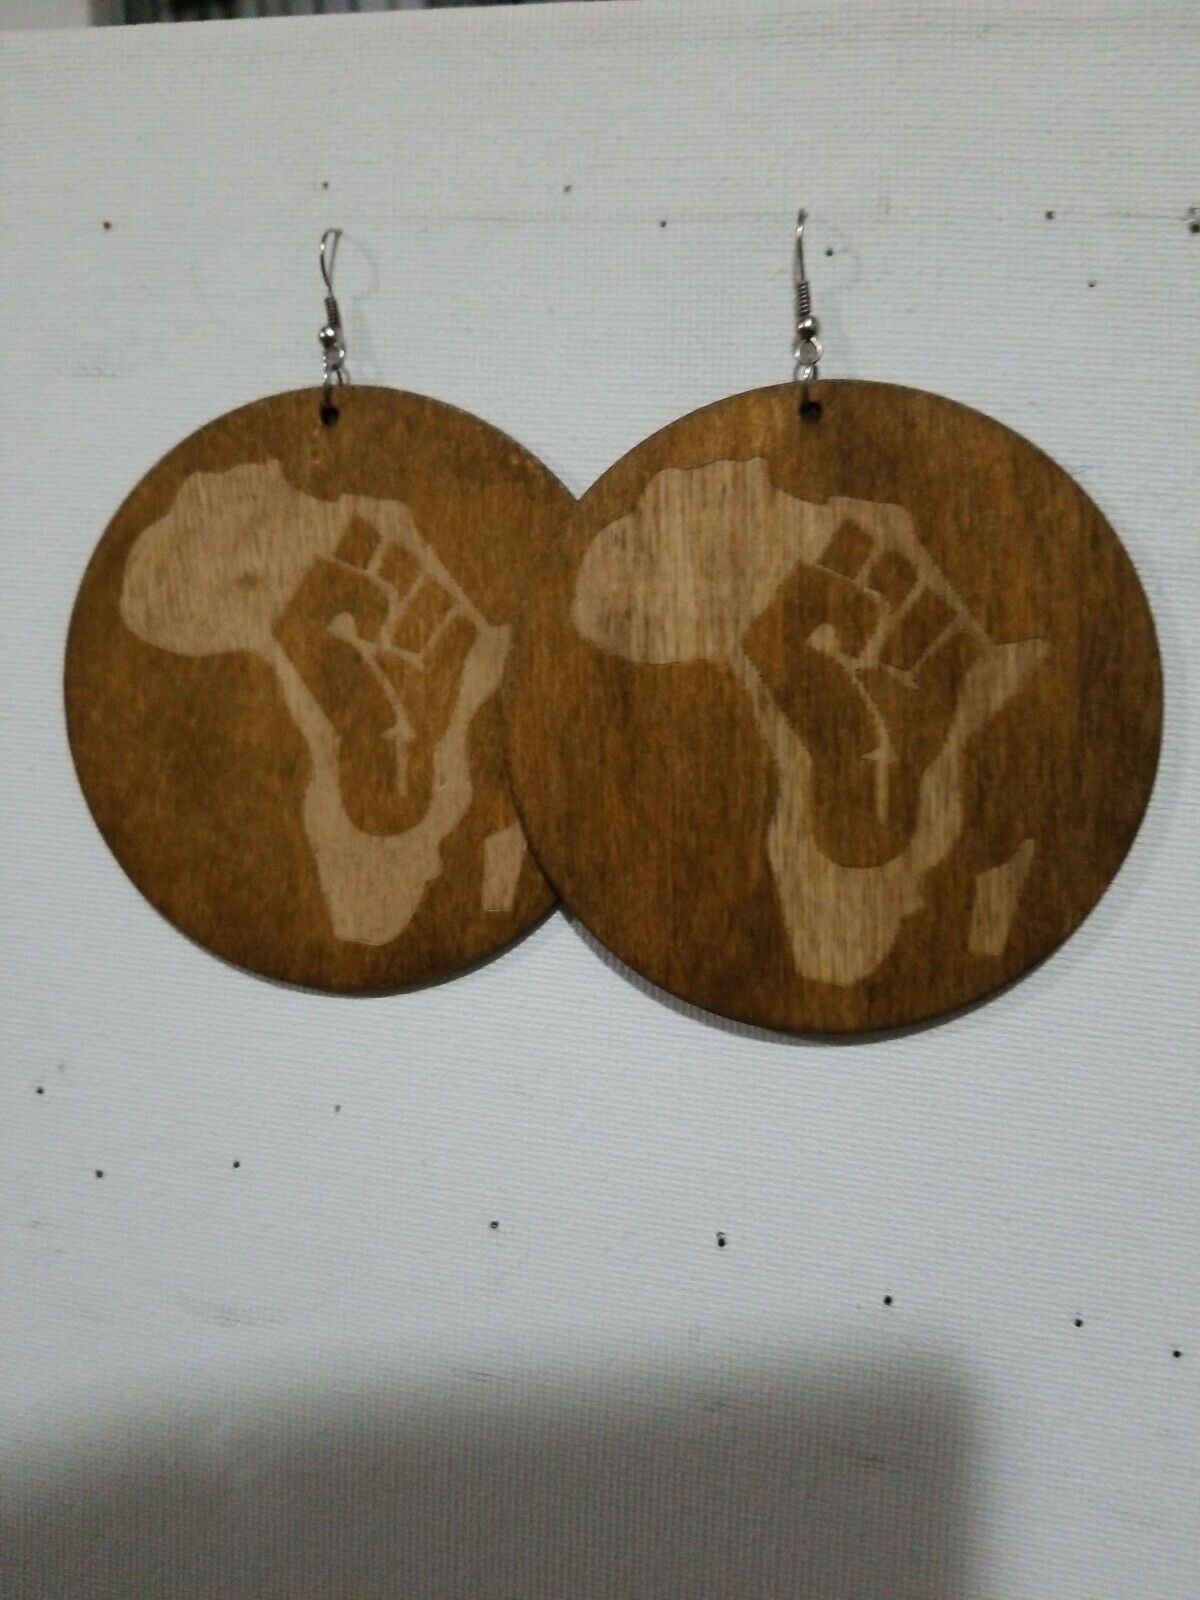 Wooden Large Africa Map and Clinched fist.Light weight errings